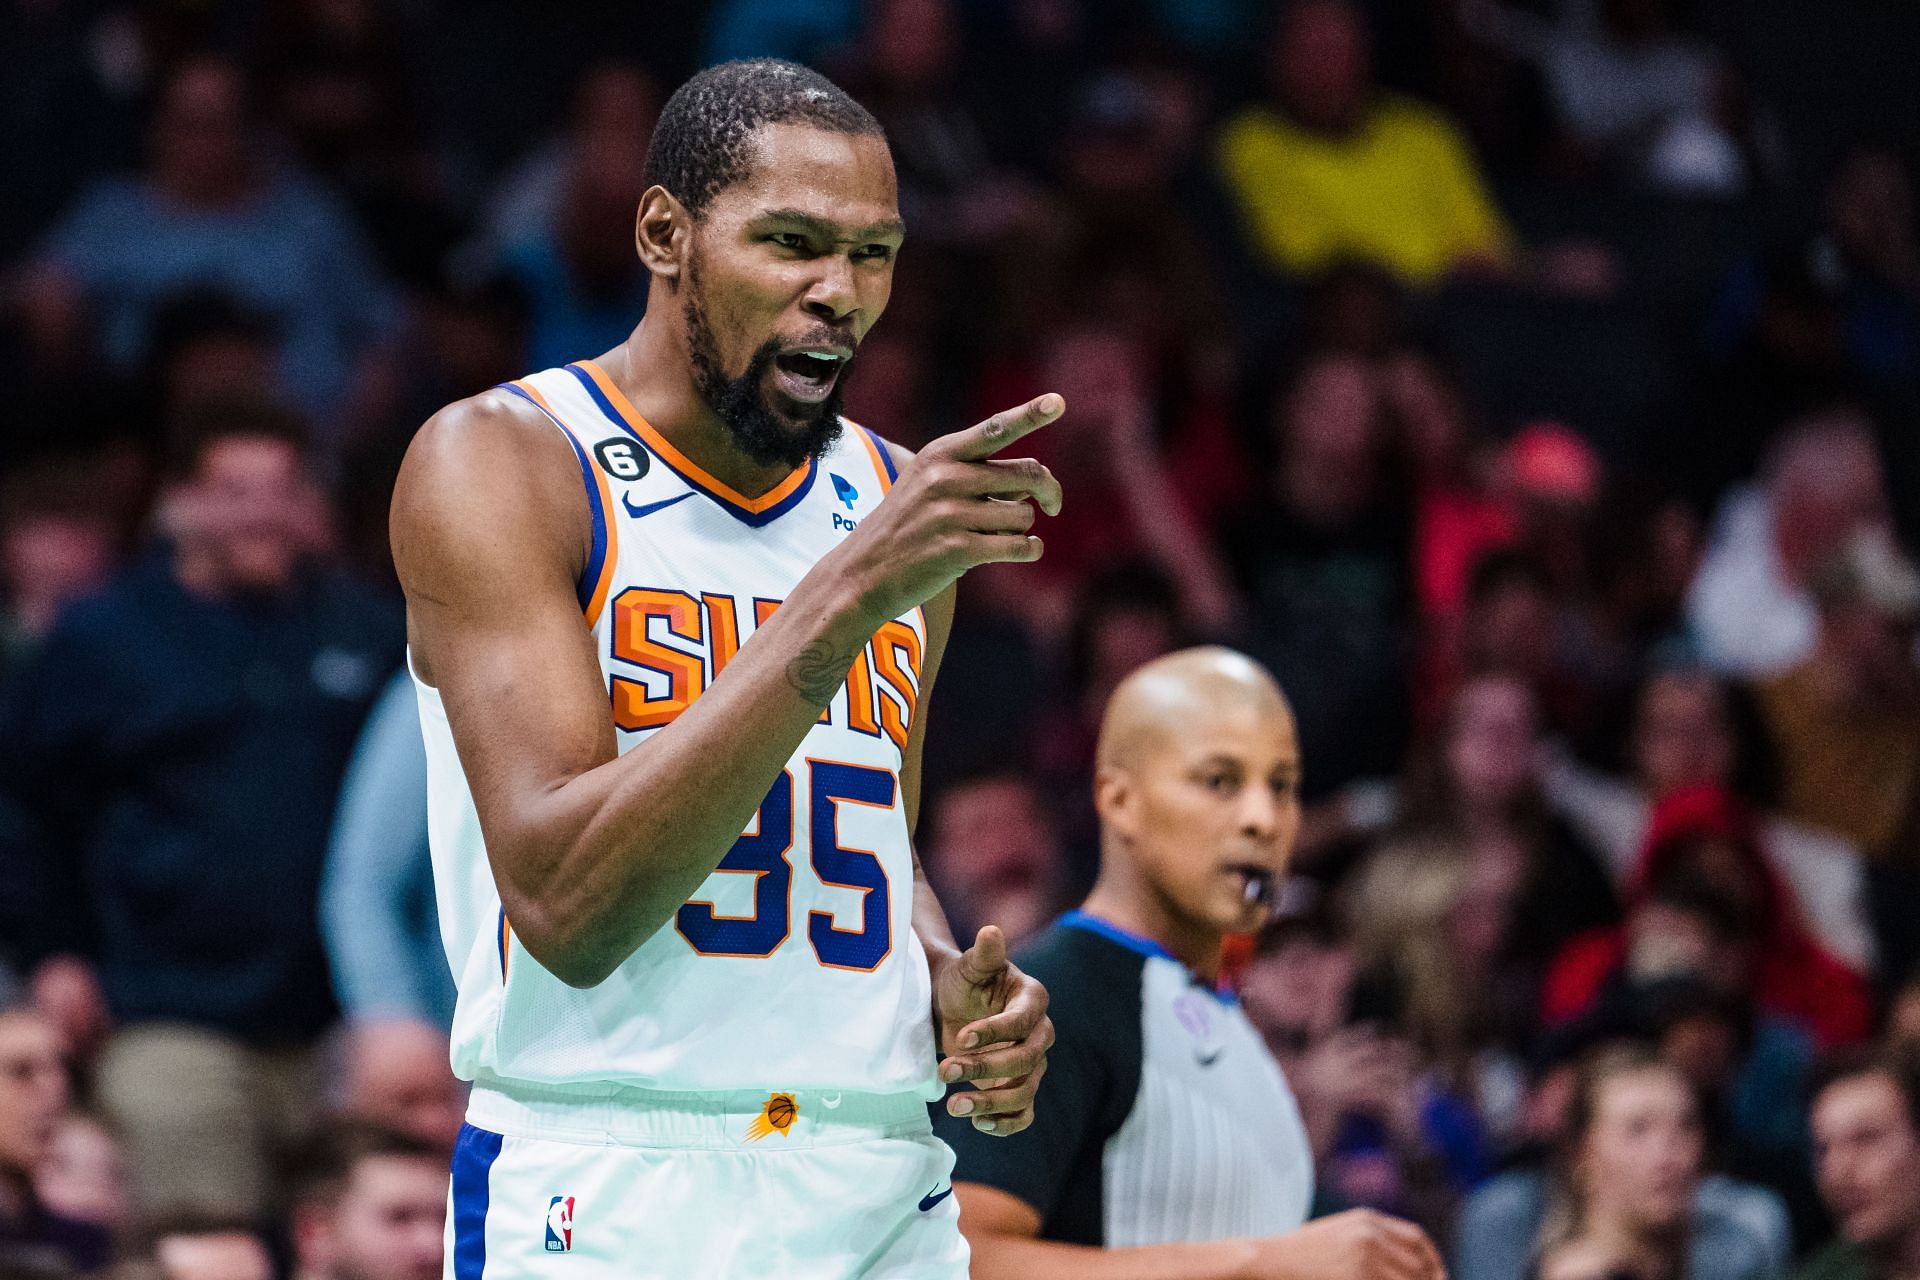 Kevin Durant of the Phoenix Suns